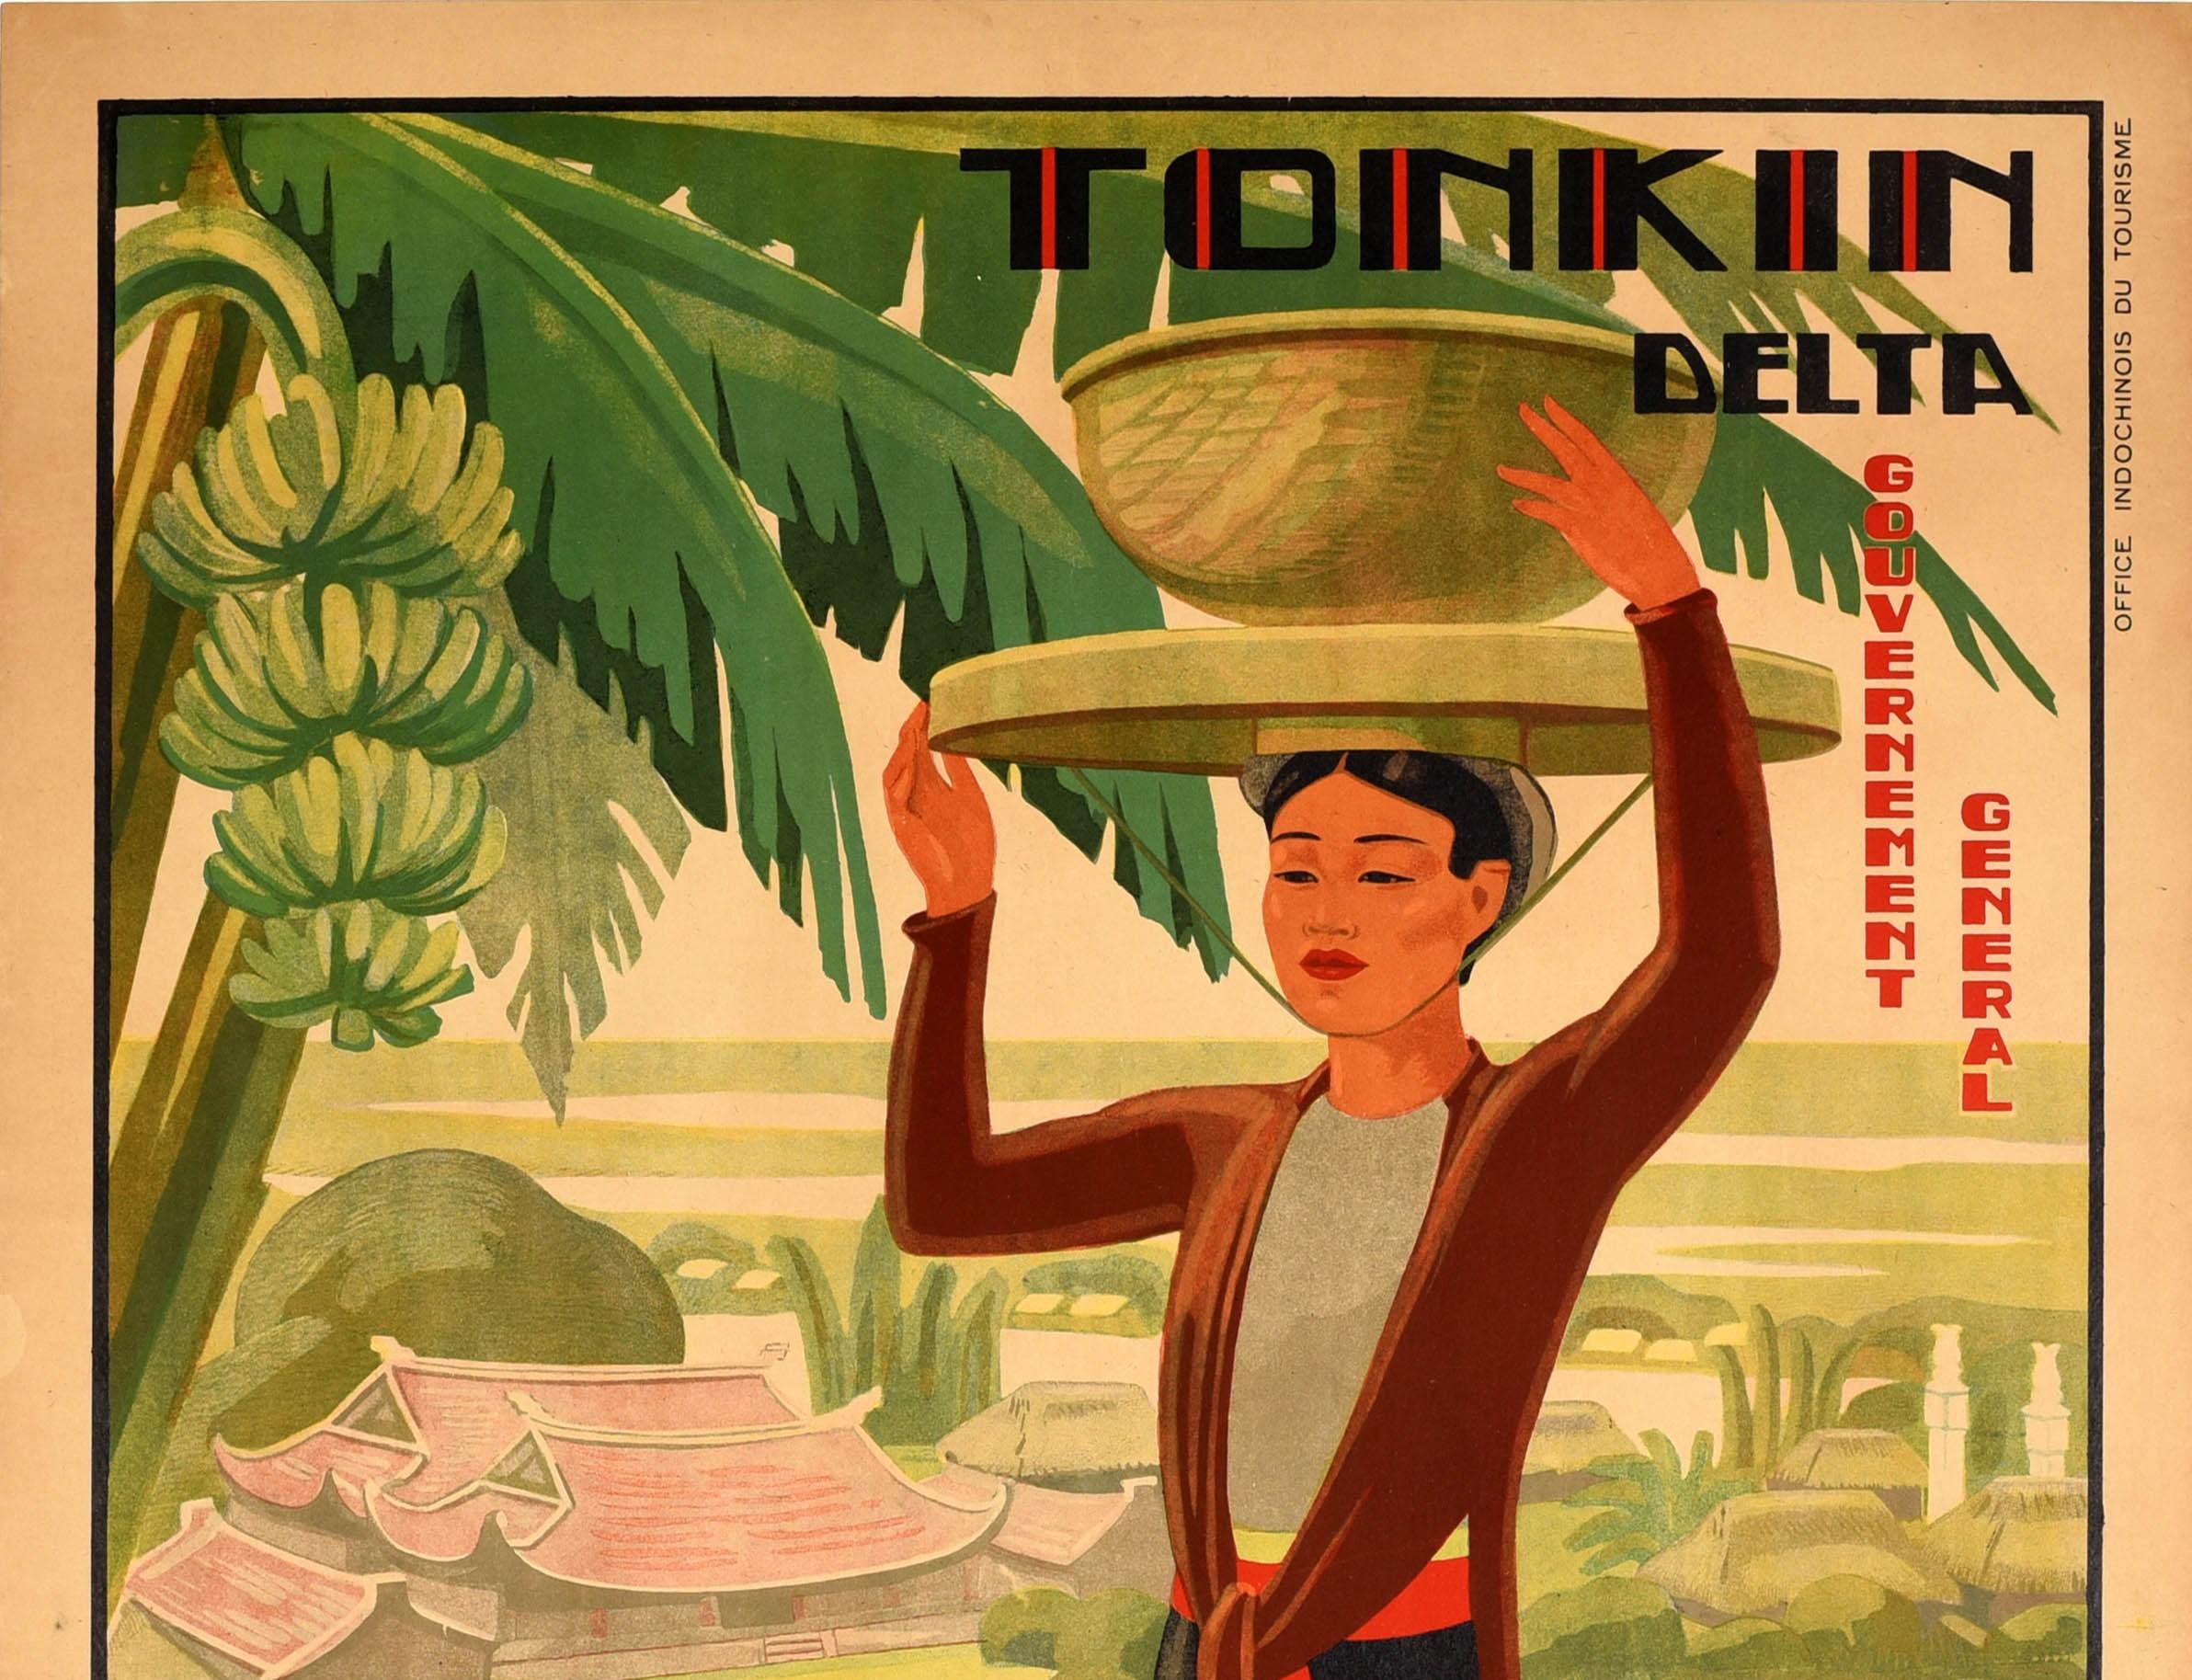 Original vintage Asia travel poster for Tonkin Delta L'Indochine Francais / French Indochina featuring farmers carrying baskets on their wide brimmed hats and on shoulder yokes up a hill with boats on the water and buildings below and a banana tree